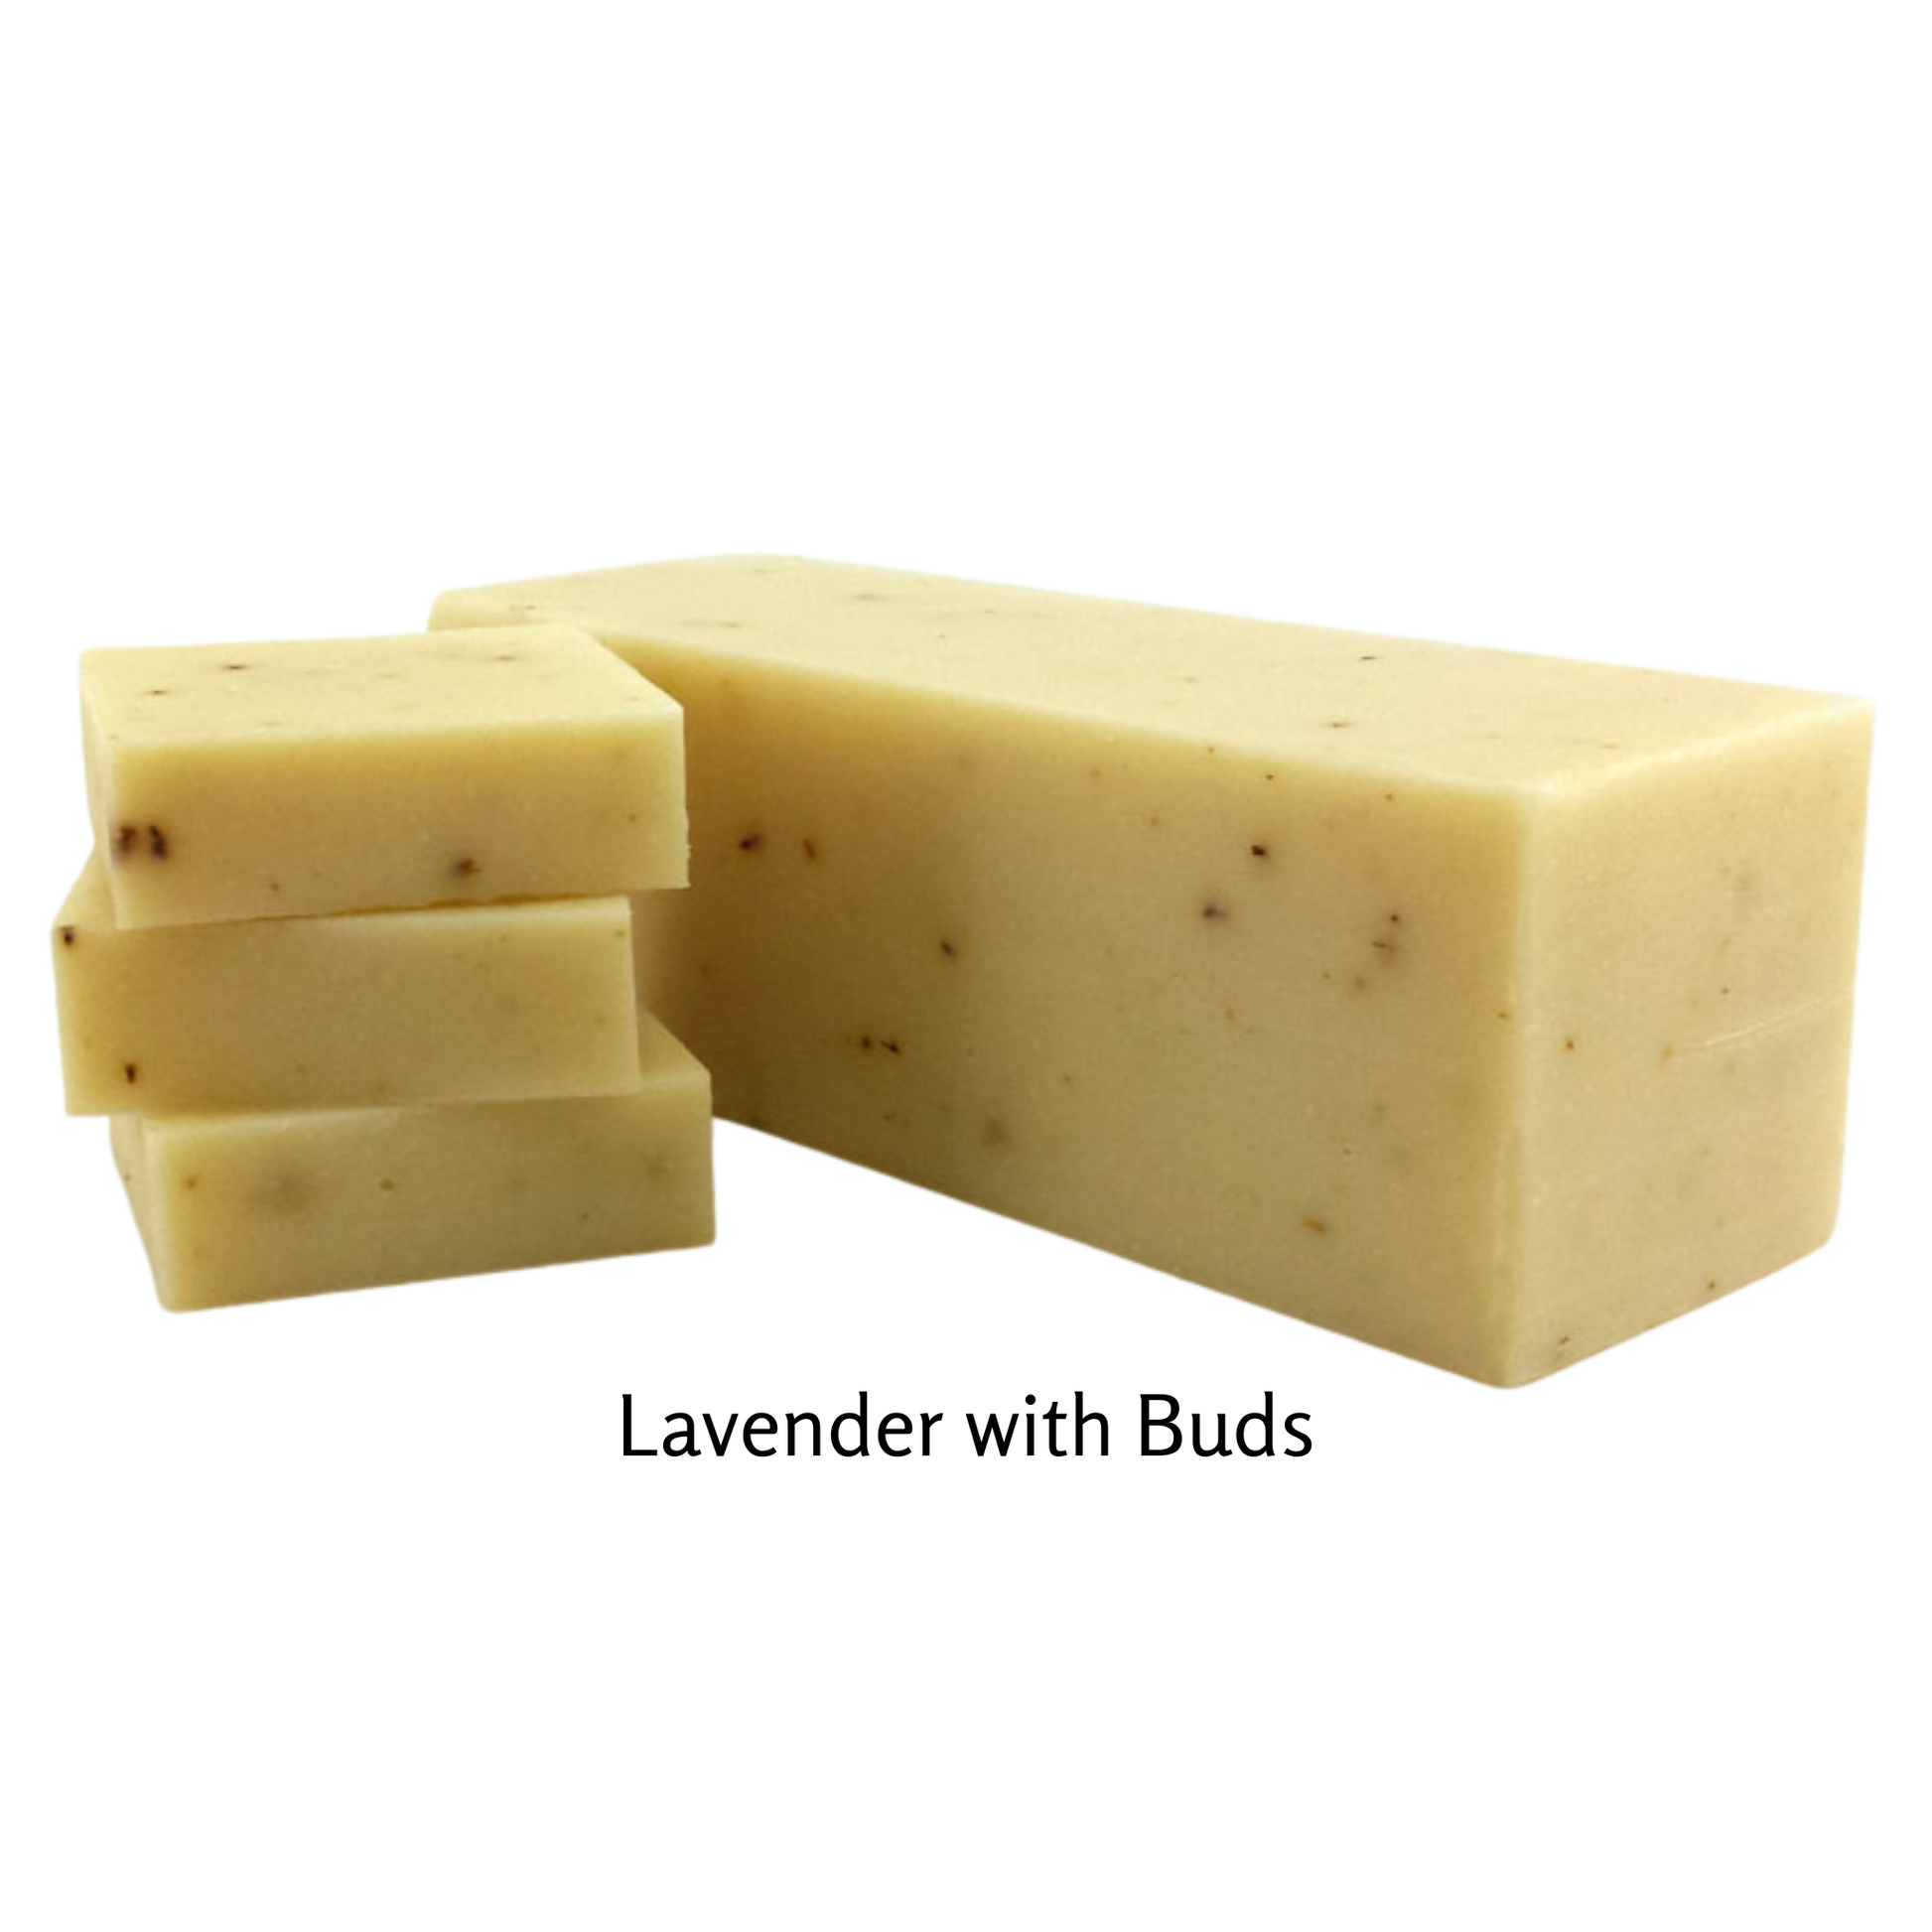 This soap has a strong lavender scent and fresh lavender buds. It's made with antioxidant enriched ingredients like shea butter and olive oil. Reviews note that it has a pleasant scent and lathers well. 4.5 oz